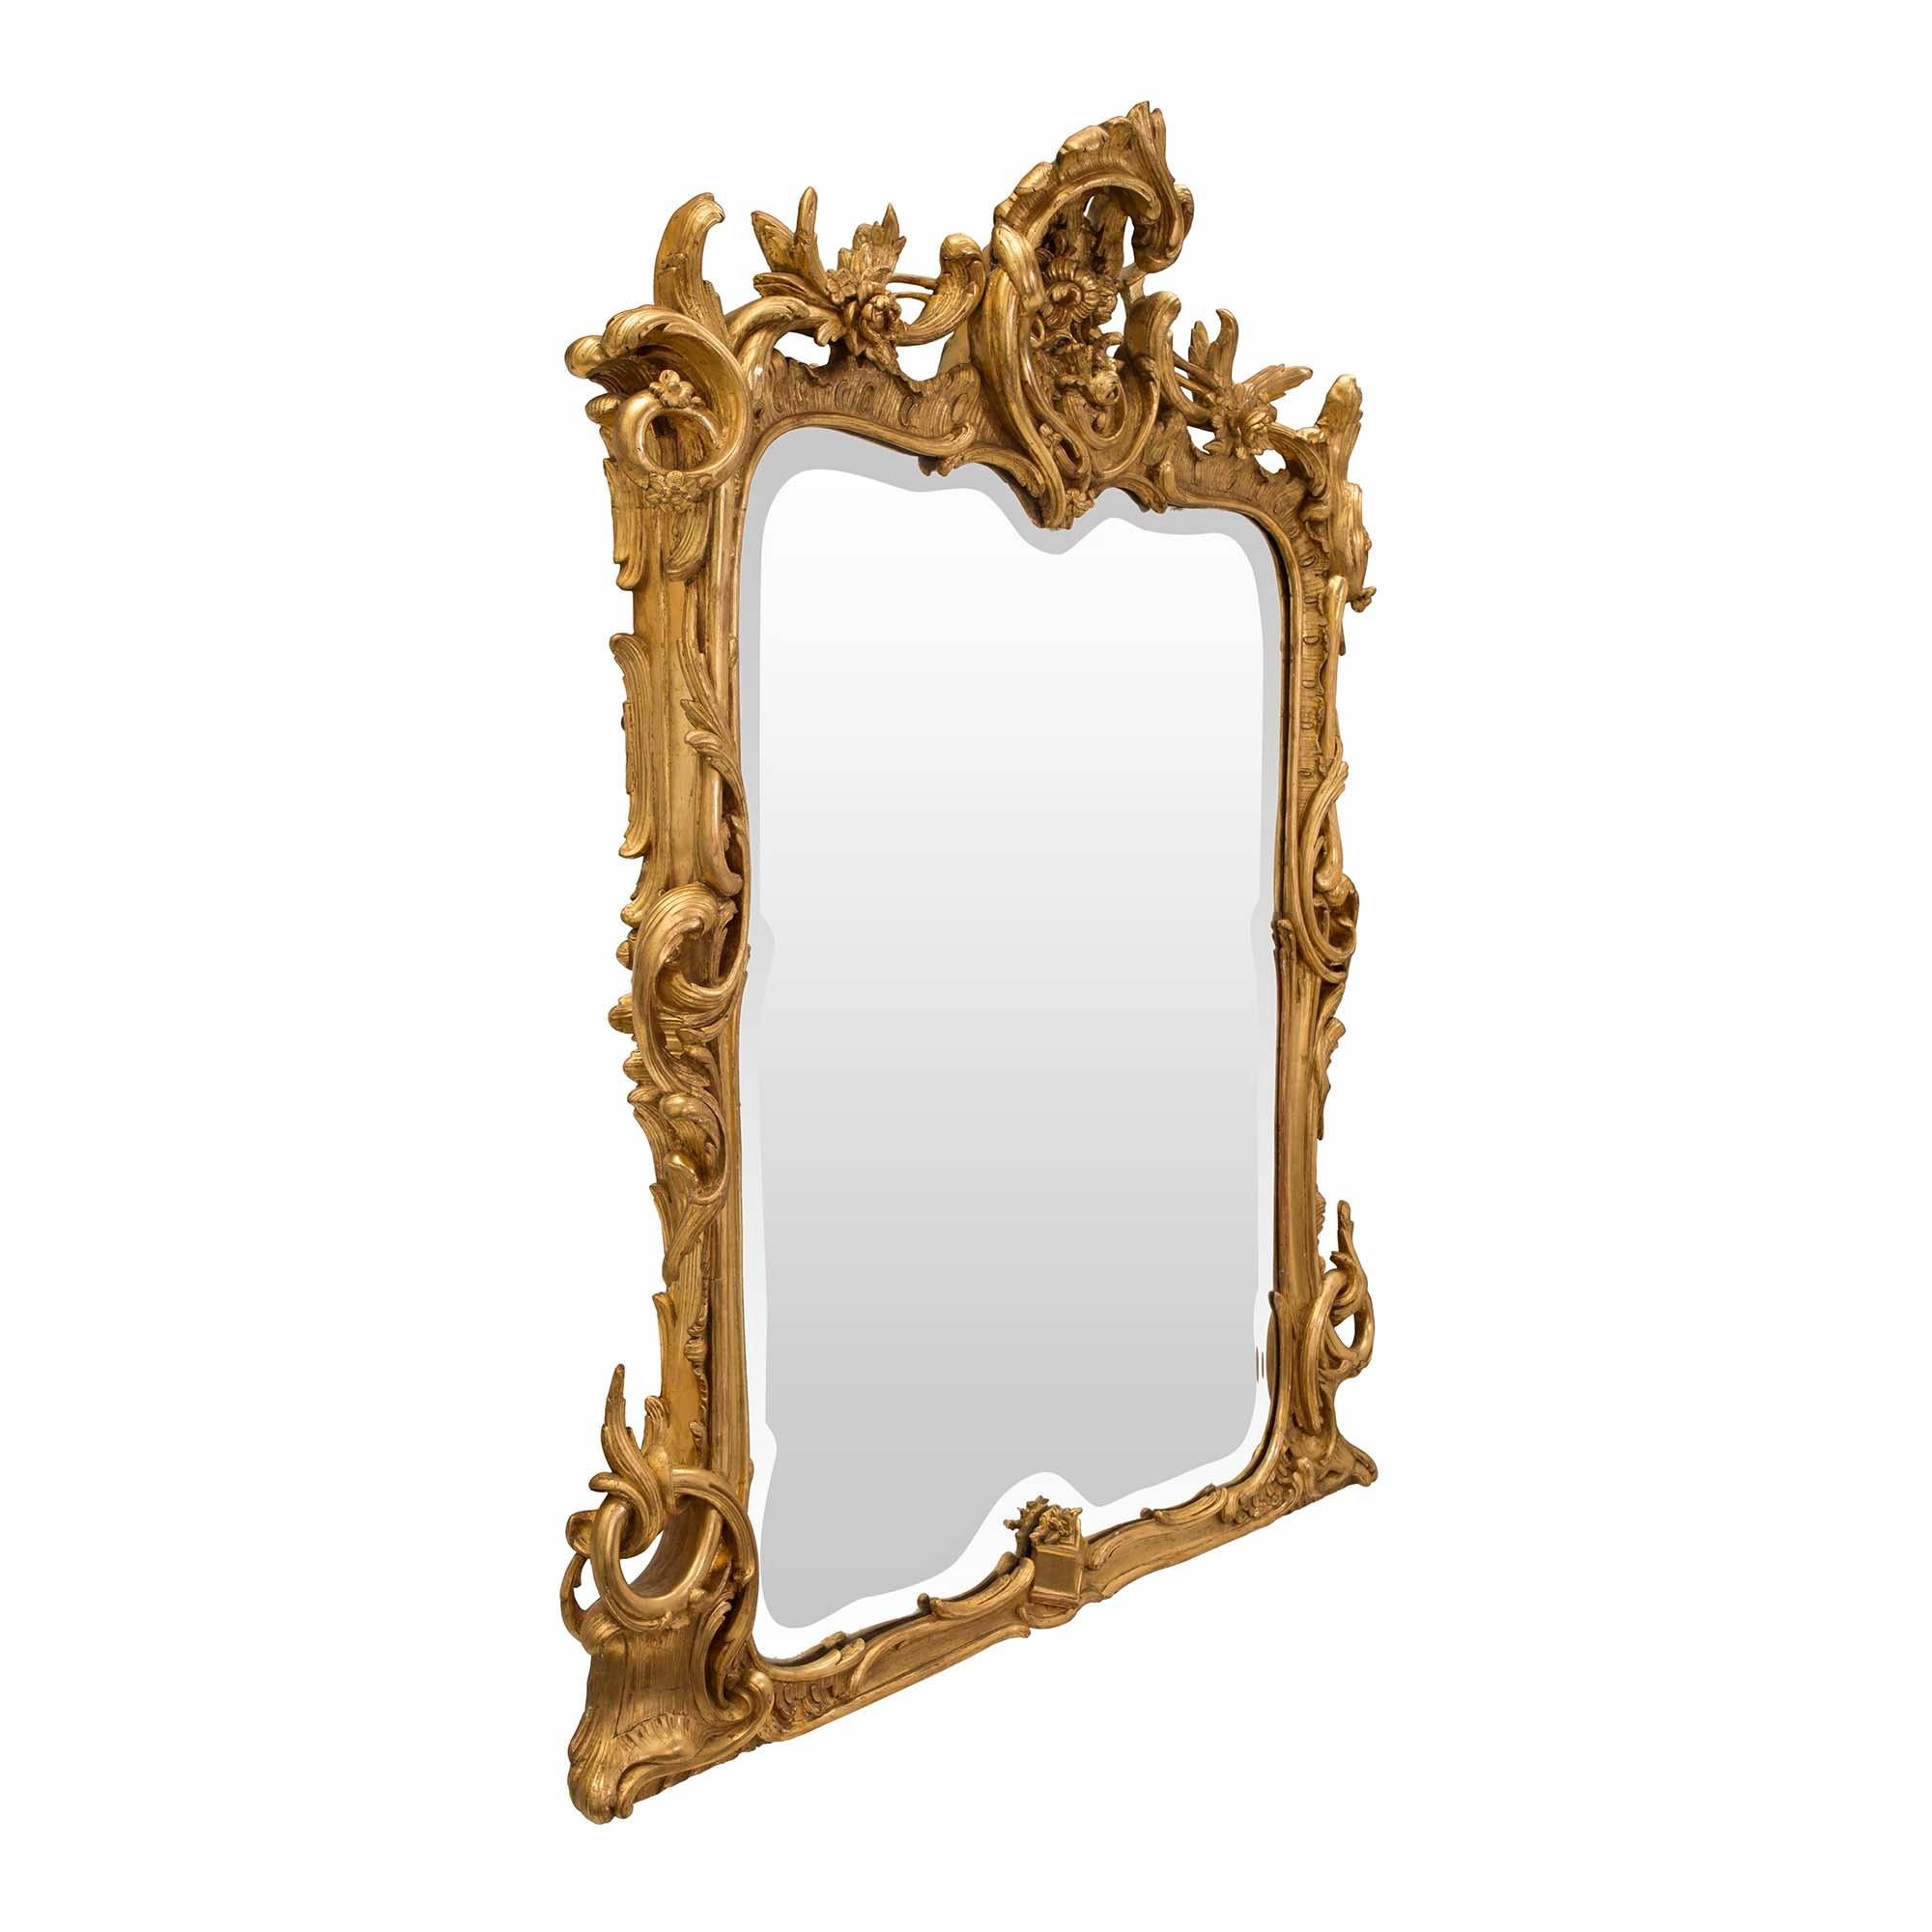 A striking Italian 19th century Baroque period rectangular giltwood mirror. The mirror retains its original mirror plate with a beautiful bevel which repeats the shape of the frame. The giltwood border displays impressive and richly carved scrolled